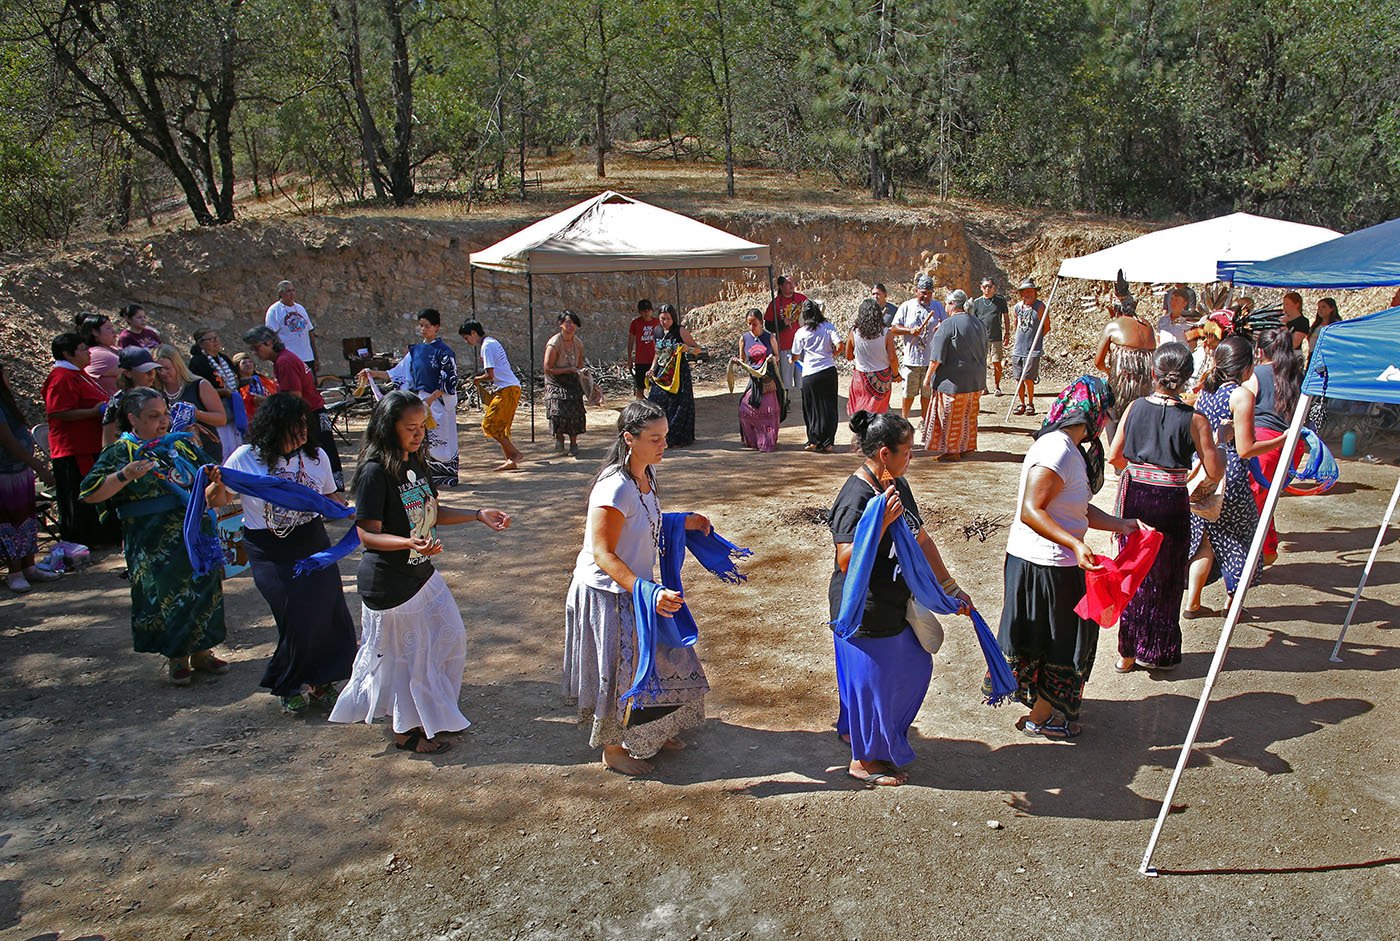  Redding, CA — Women dance on grounds that the Winnemem Wintu hope will become a roundhouse one day. It is part of a former Wintu village site. September 26, 2019. Tom Levy/The Spiritual Edge 